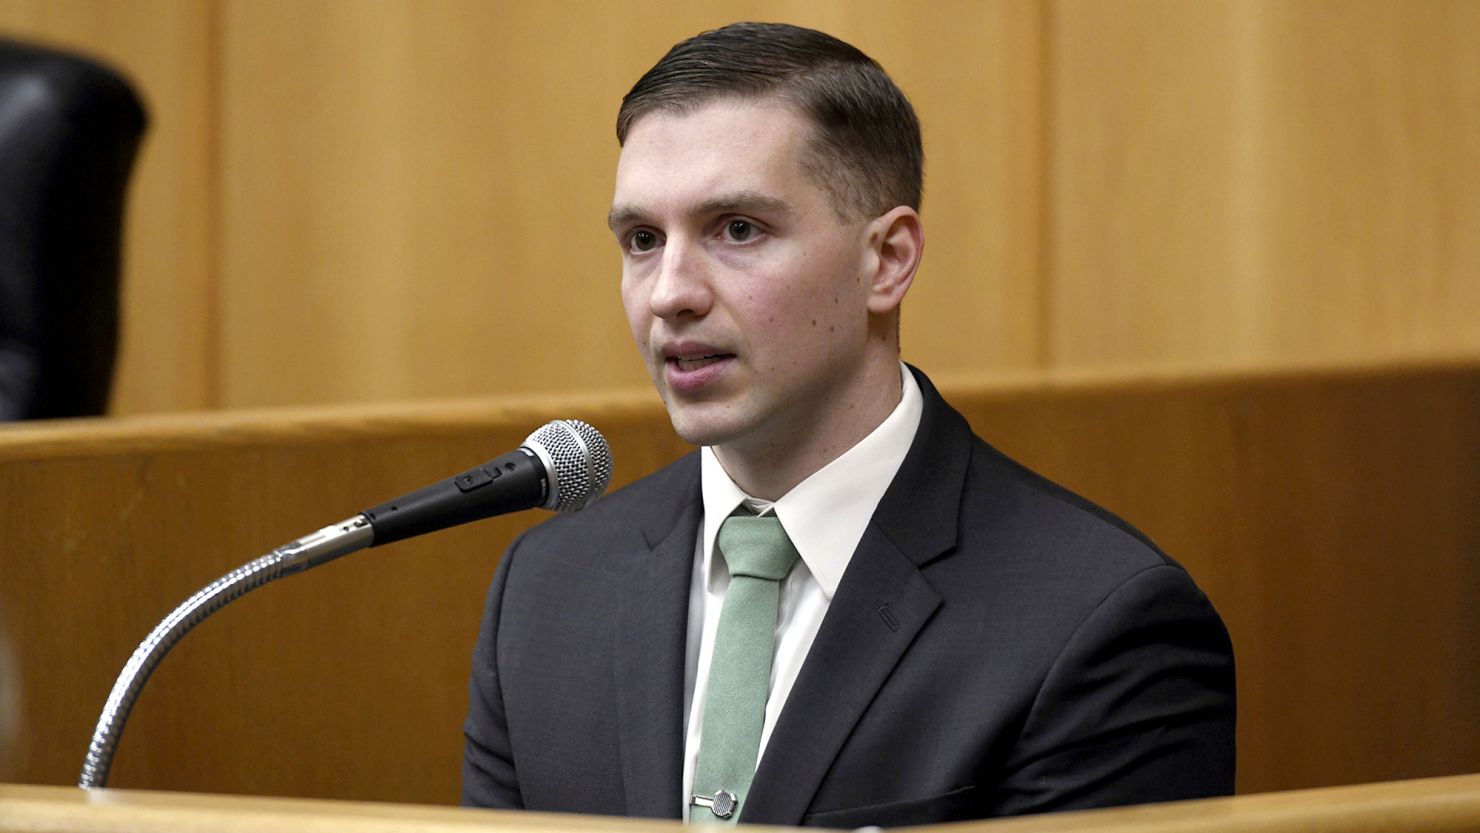 Connecticut State Trooper Brian North testifies during his trial in Connecticut Superior Court in Milford.